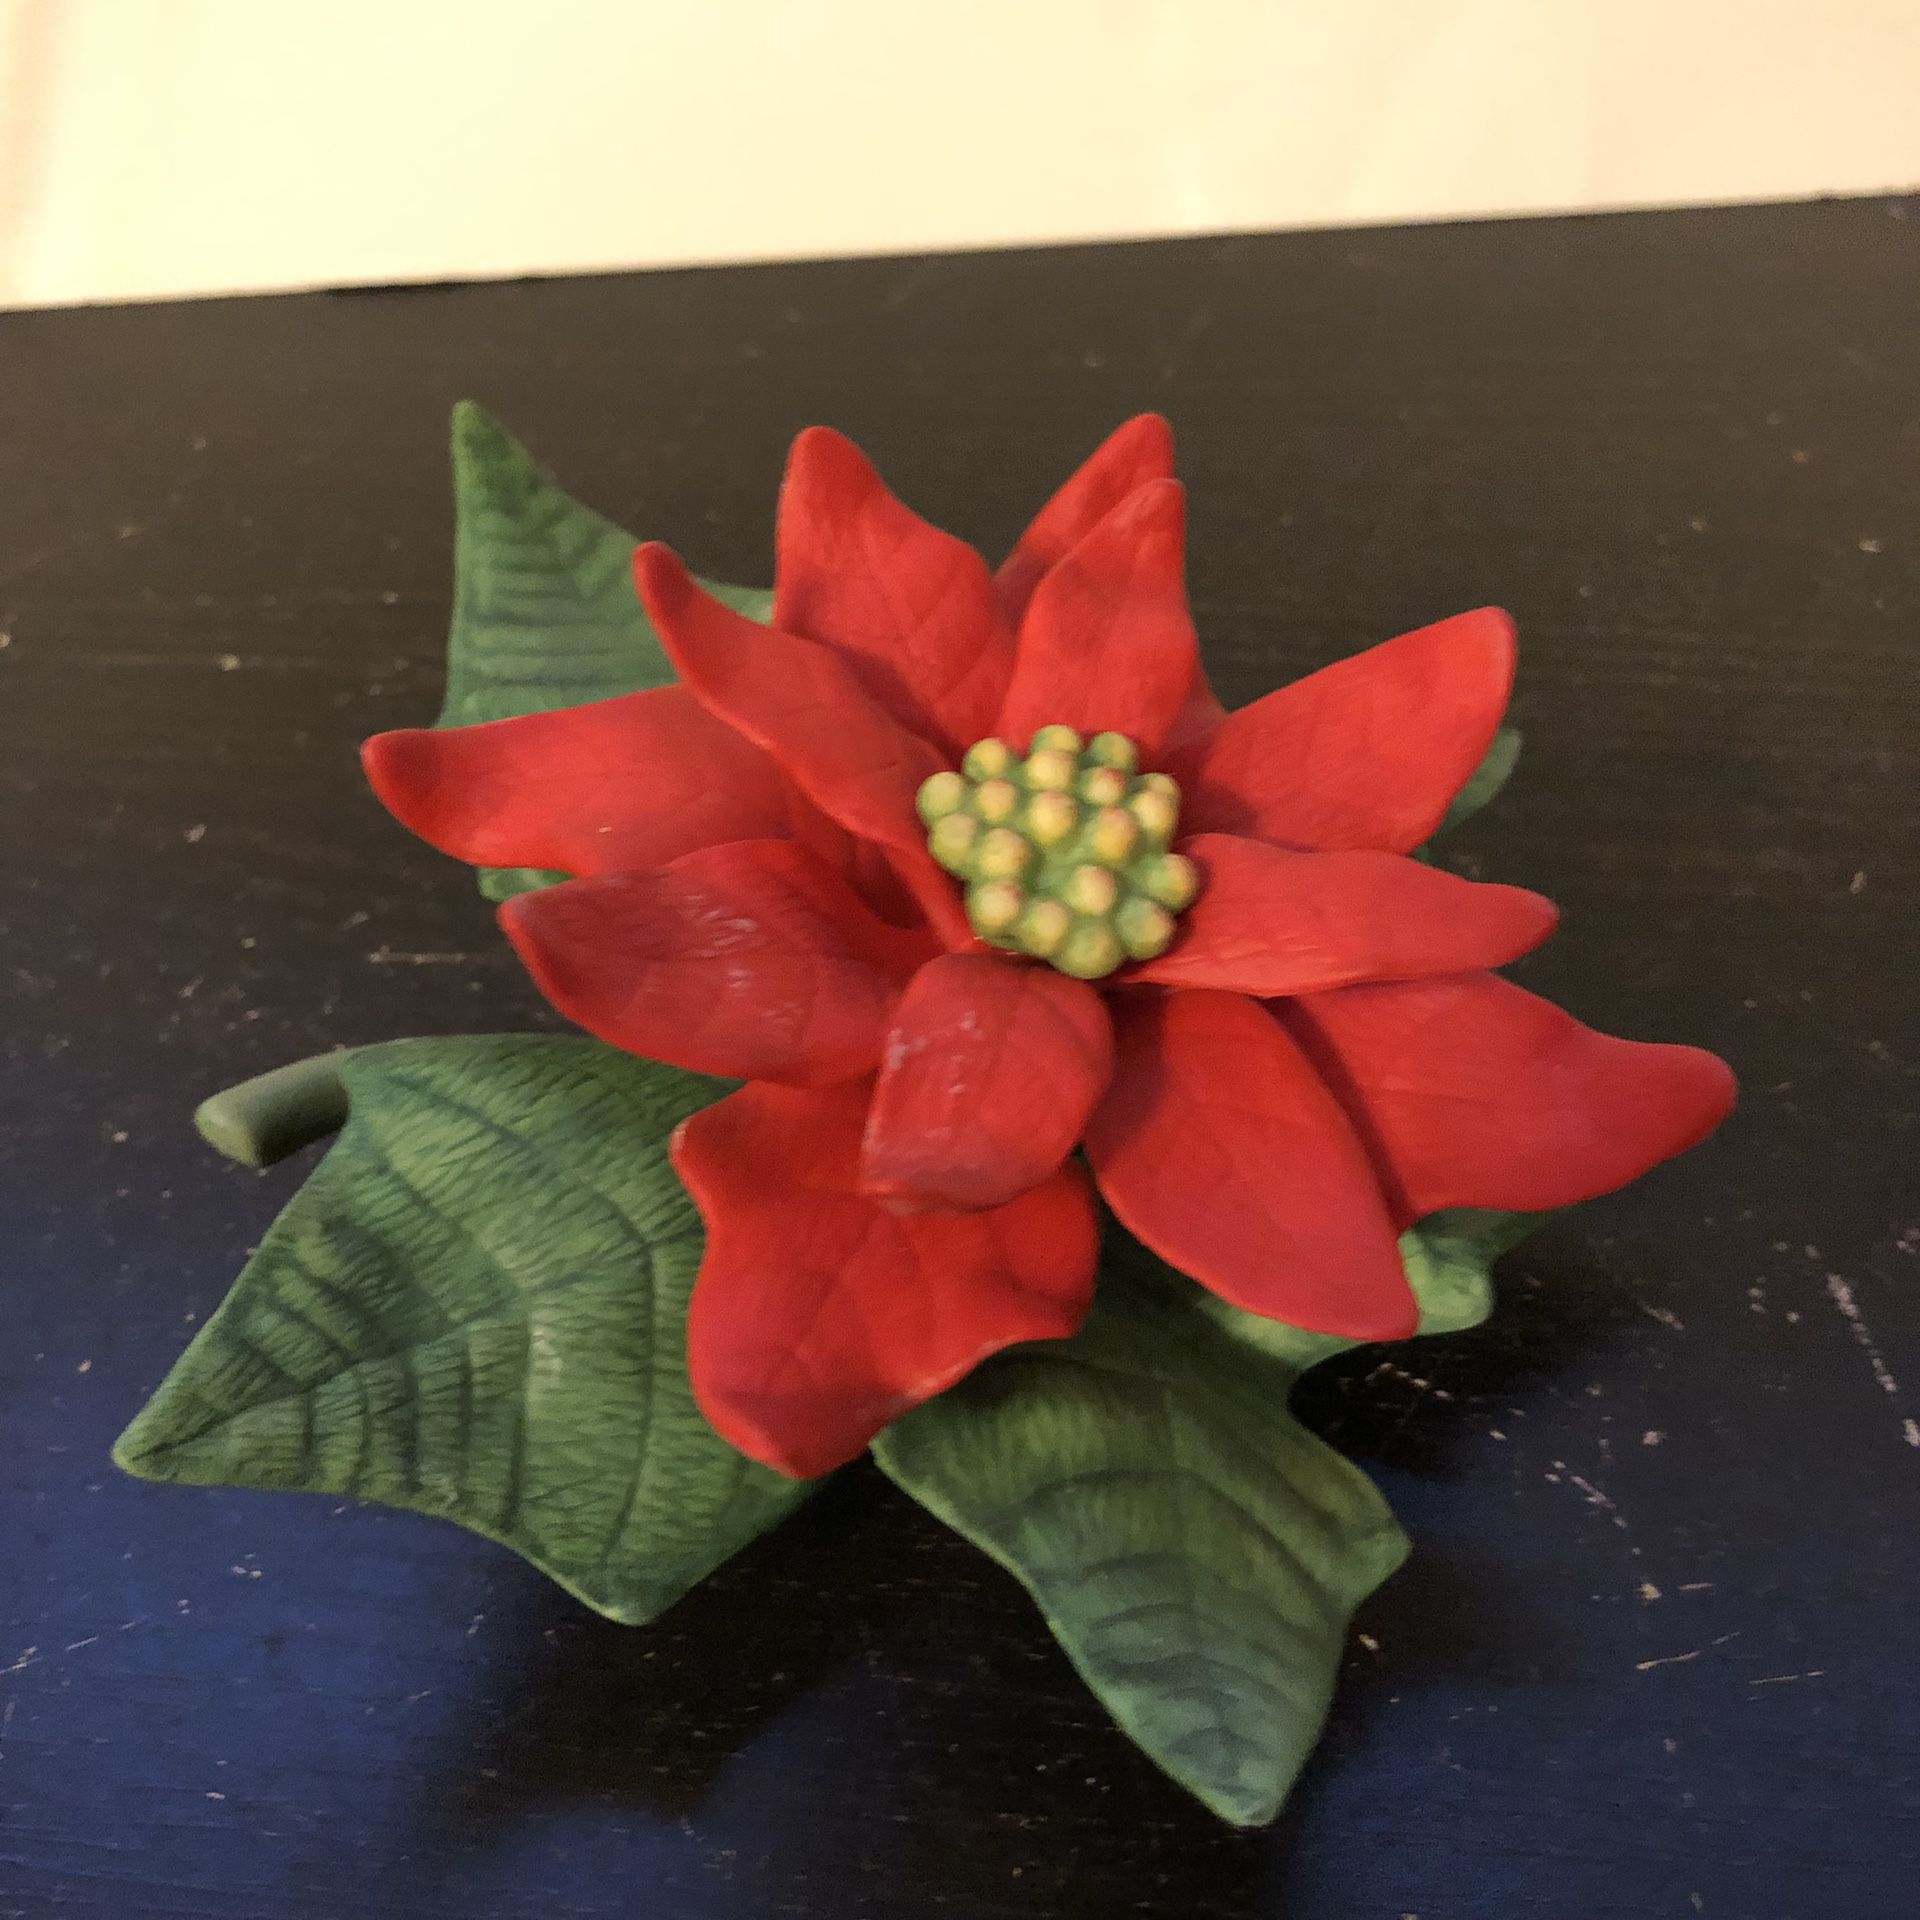 Vintage Lenox Christmas Fine Porcelain Poinsettia Flower Figurine Decor 1991 4"   **Fast Shipping** – Same day or next Day shipping.  Thanks for looki